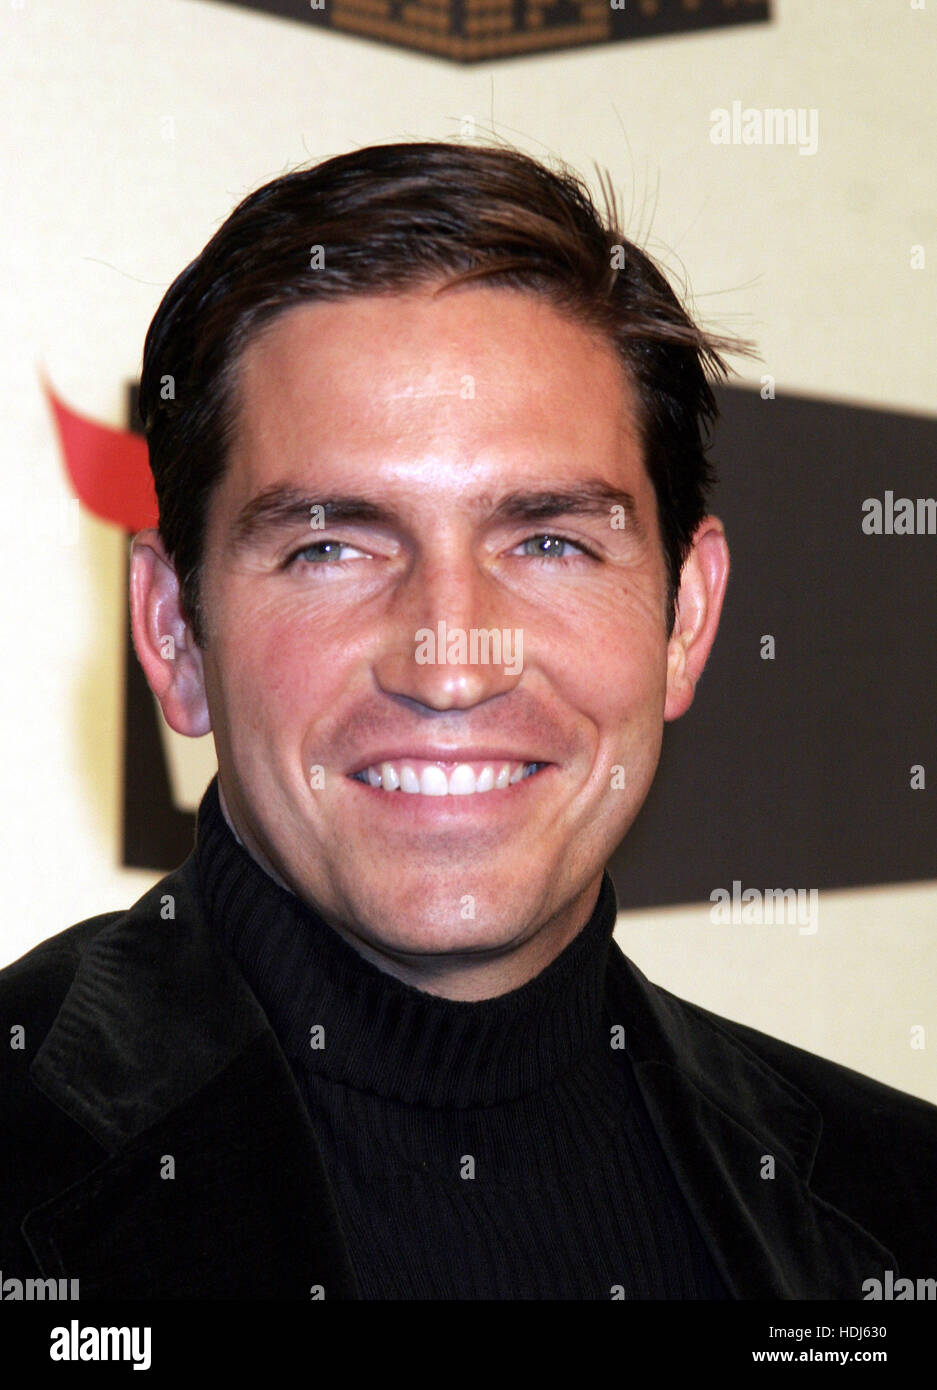 Jim Caviezel at VH-1's Big in 2004 award show on December 1, 2004 in Los Angeles. Photo credit: Francis Specker Stock Photo